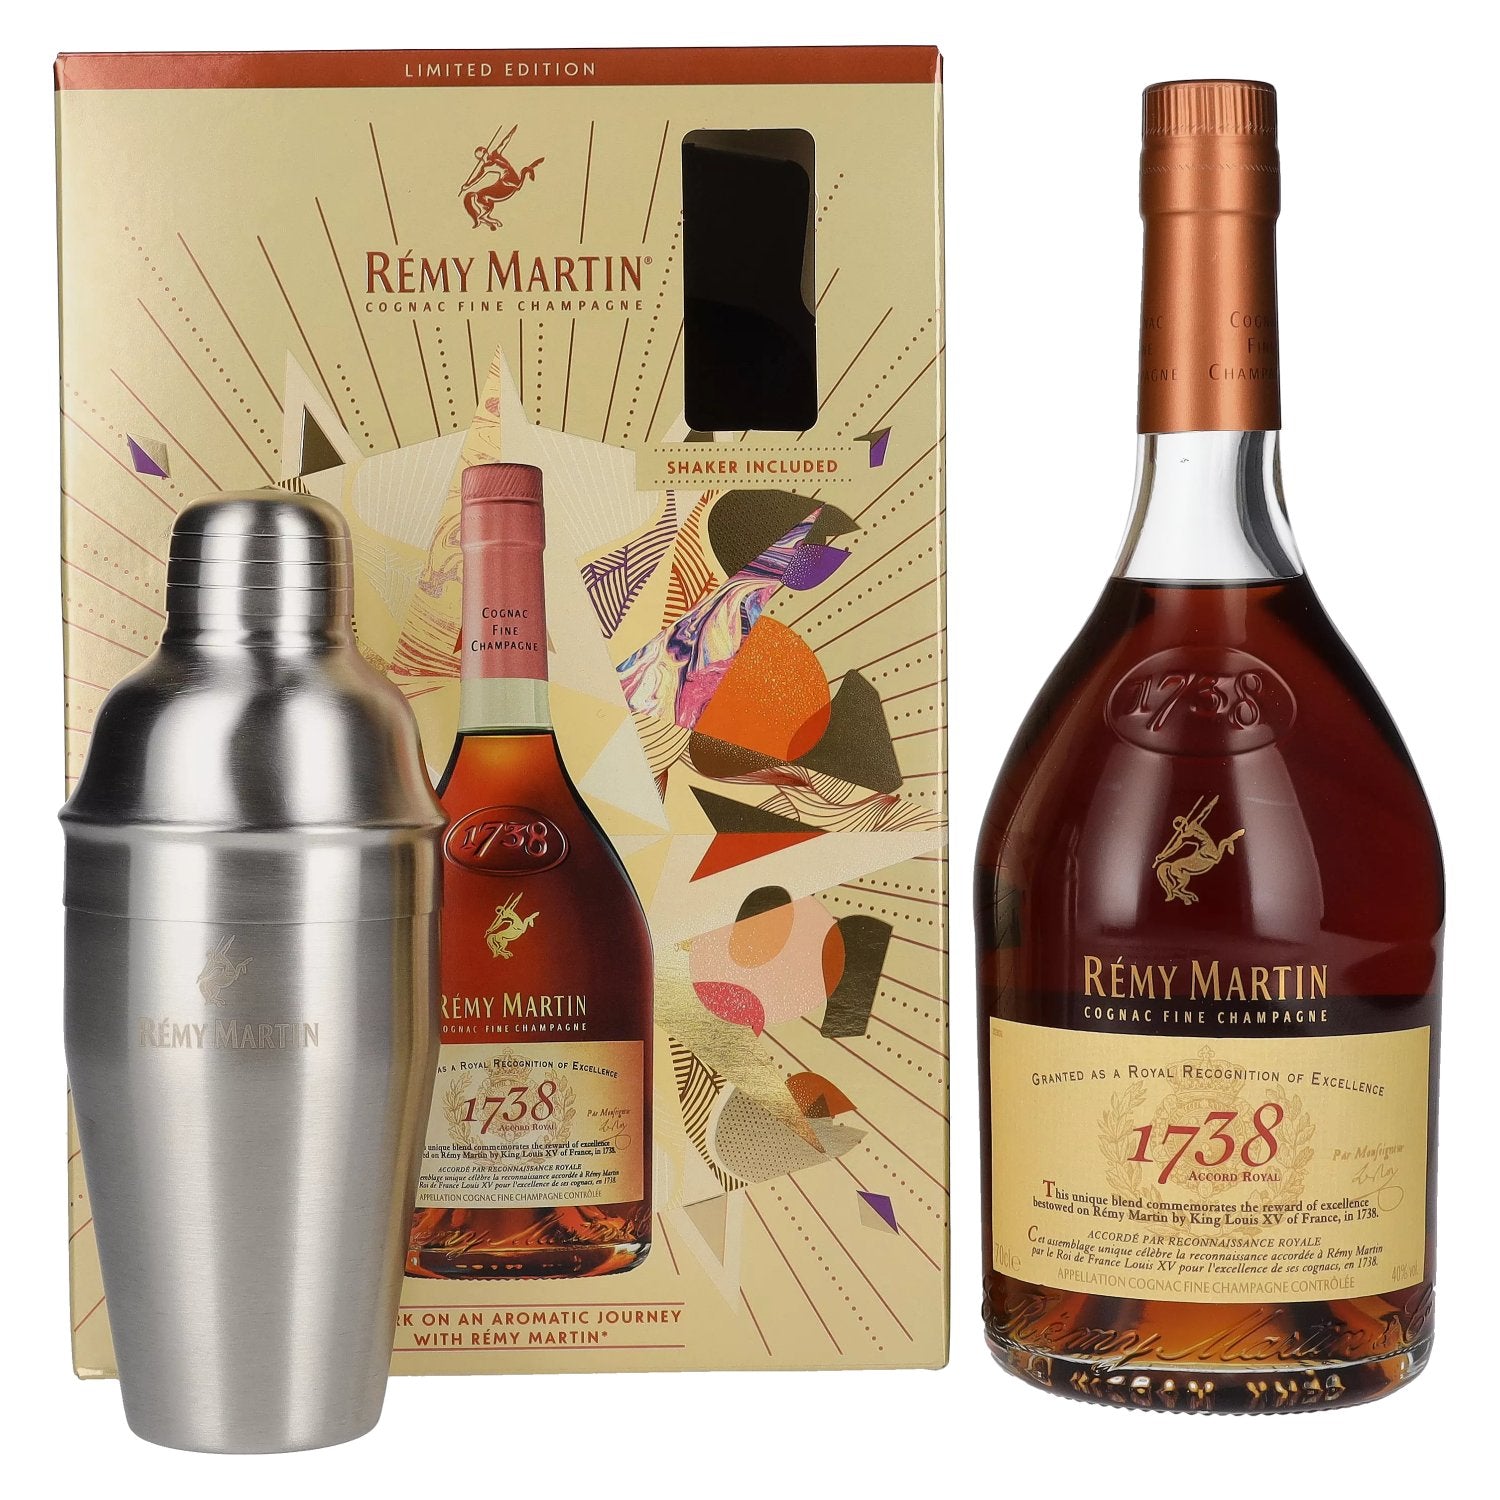 Remy Martin 1738 ACCORD ROYAL Cognac Fine Champagne 40% Vol. 0,7l in Giftbox with Shaker